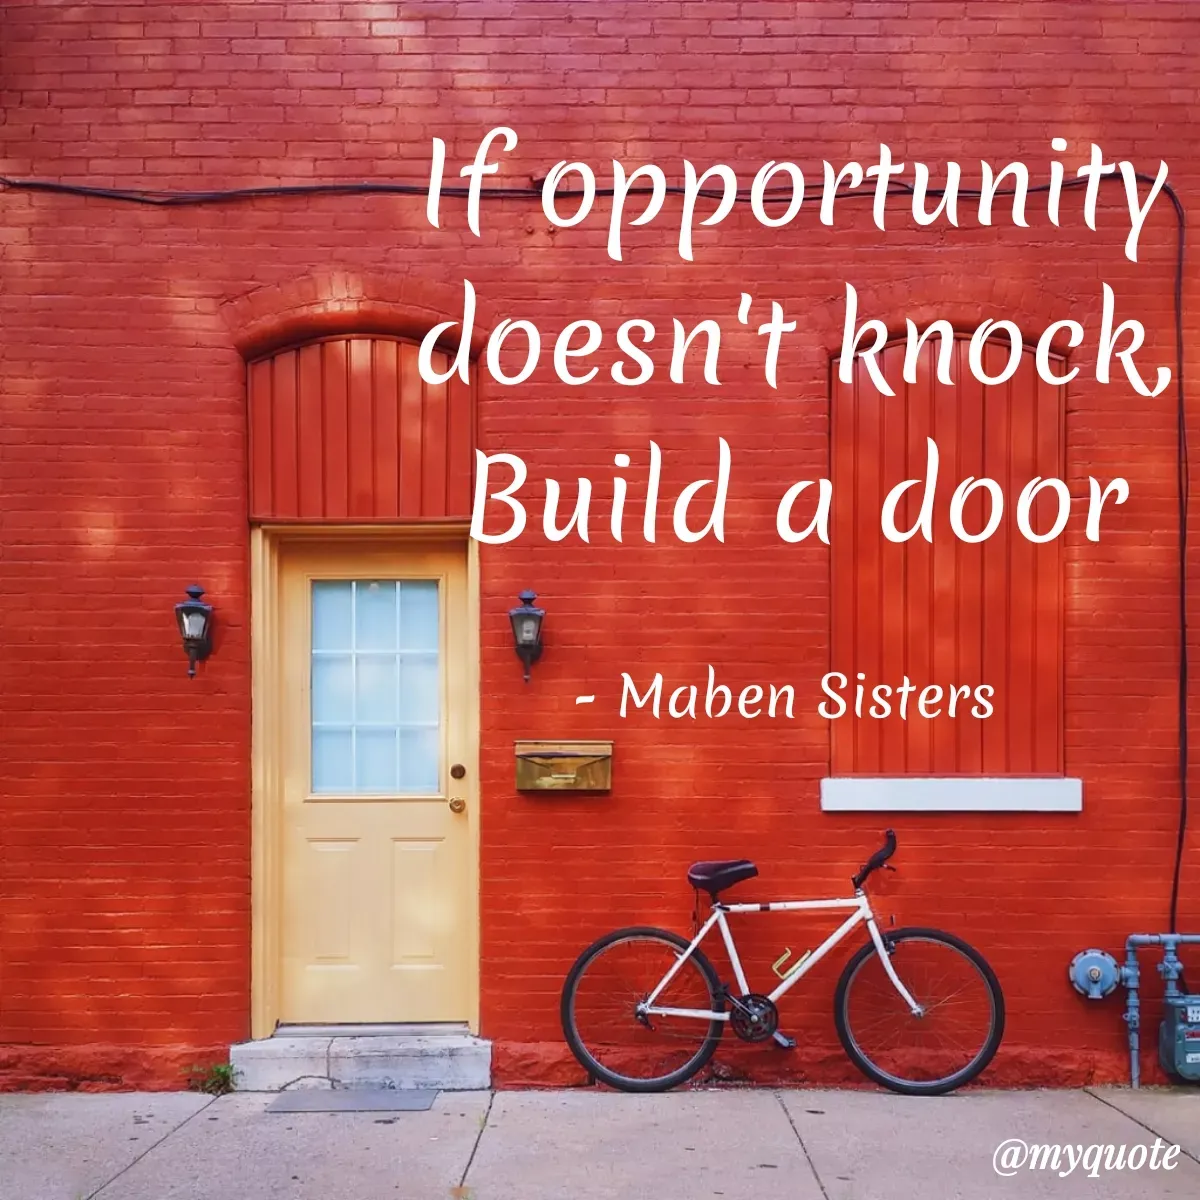 Quote by Maben Sisters - If opportunity
doesn't knock,
Build a door
- Maben Sisters
@myquote
 - Made using Quotes Creator App, Post Maker App